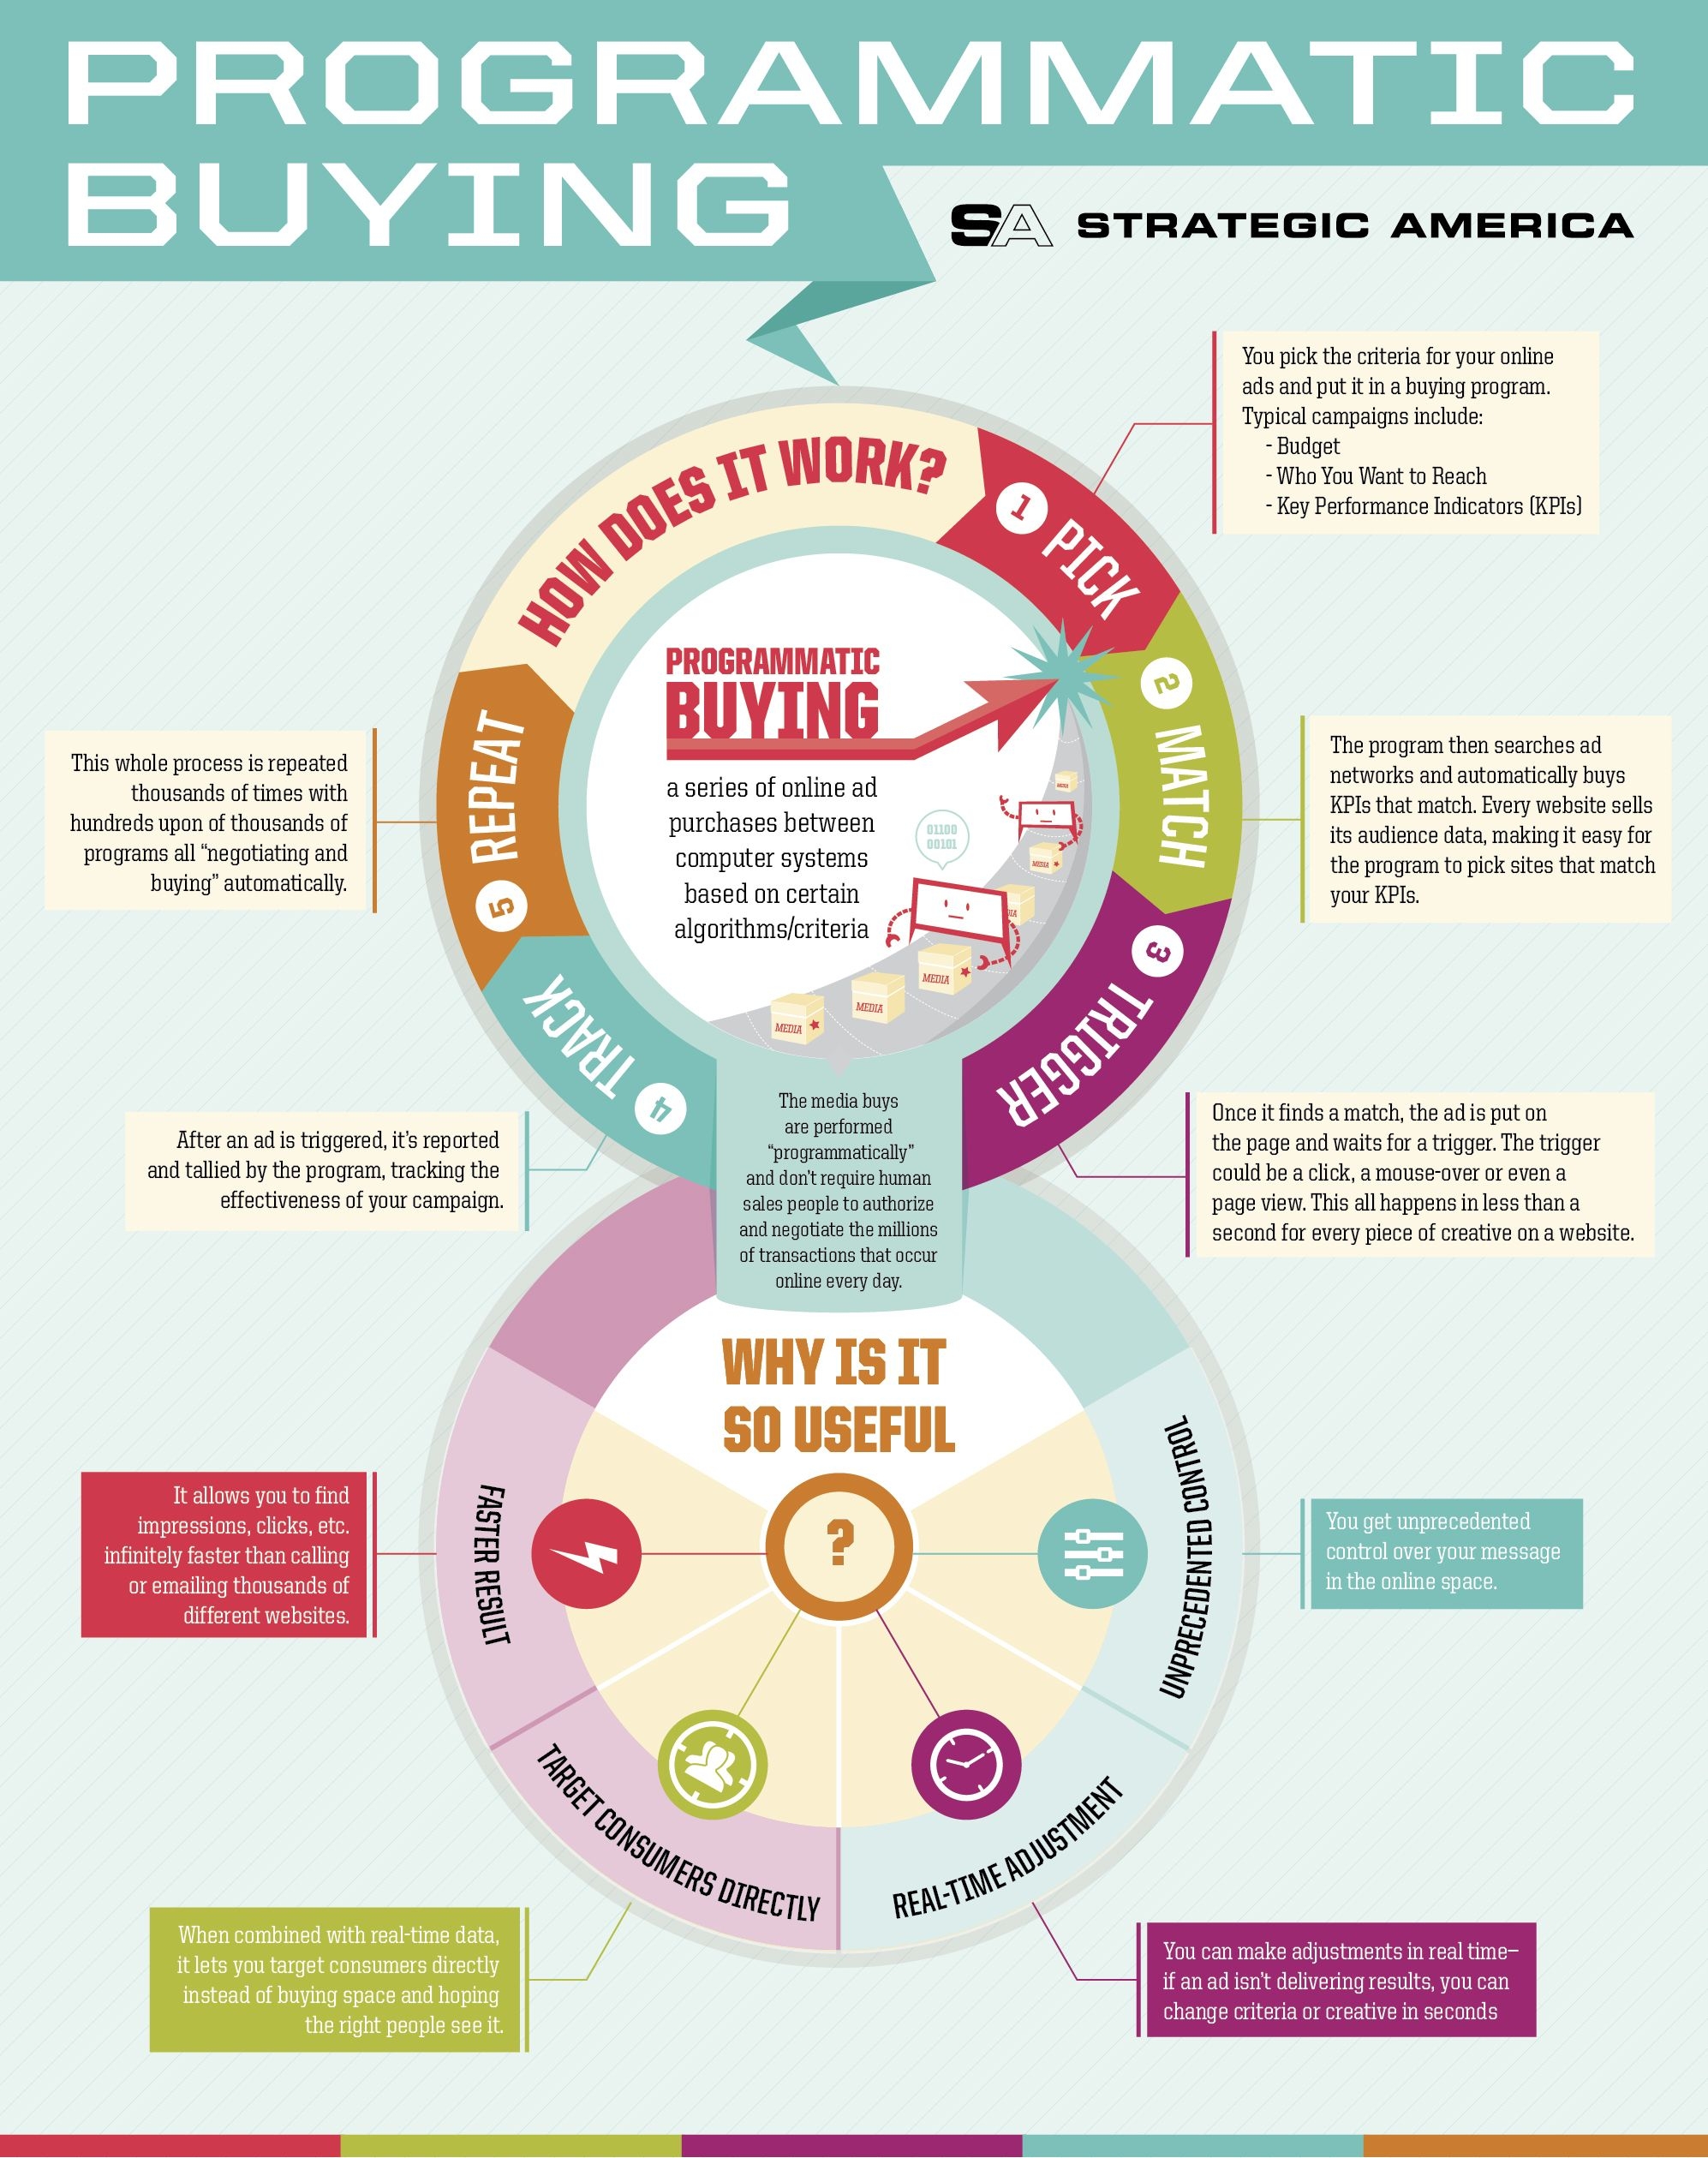 programmatic buying infographic by carterbaker.net